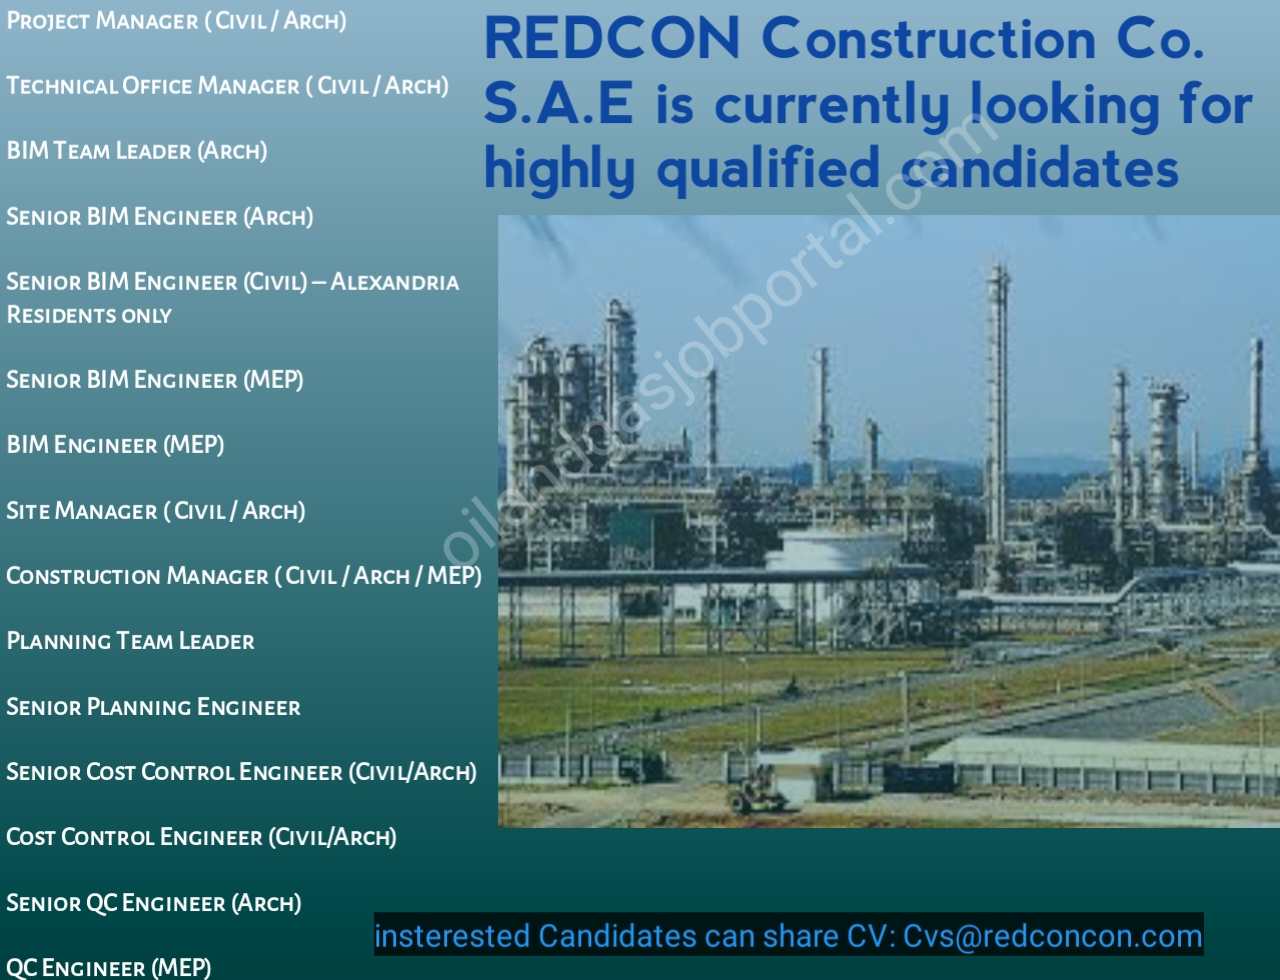 REDCON Construction Co. S.A.E is currently looking for highly qualified candidates